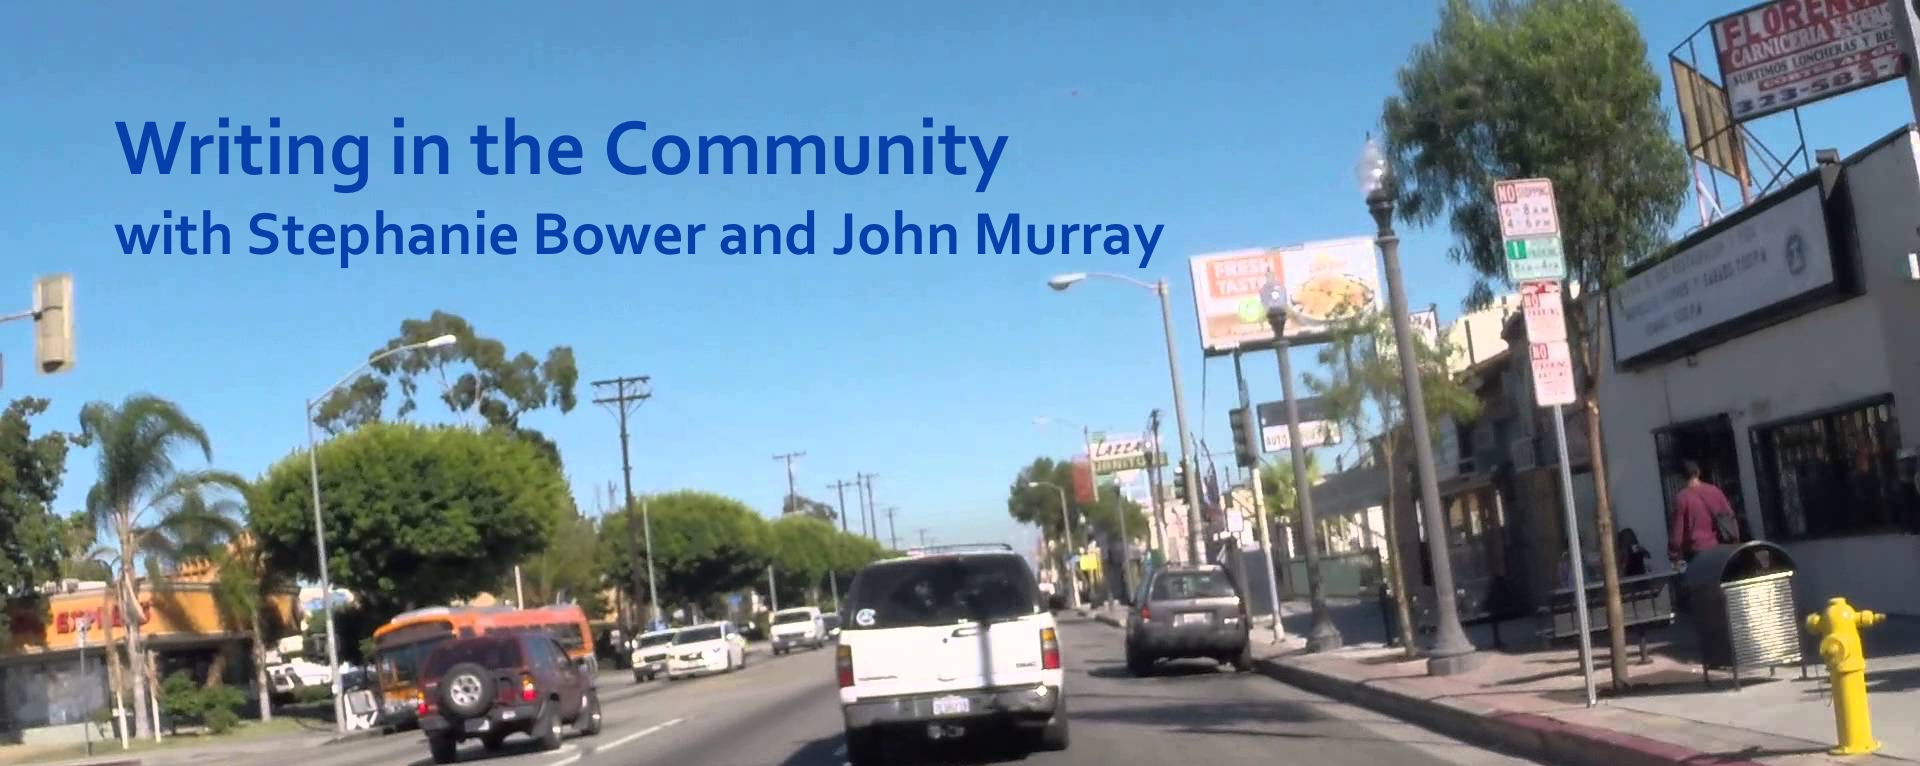 Podcast #51: Writing in the Community with Stephanie Bower and John Murray
                               